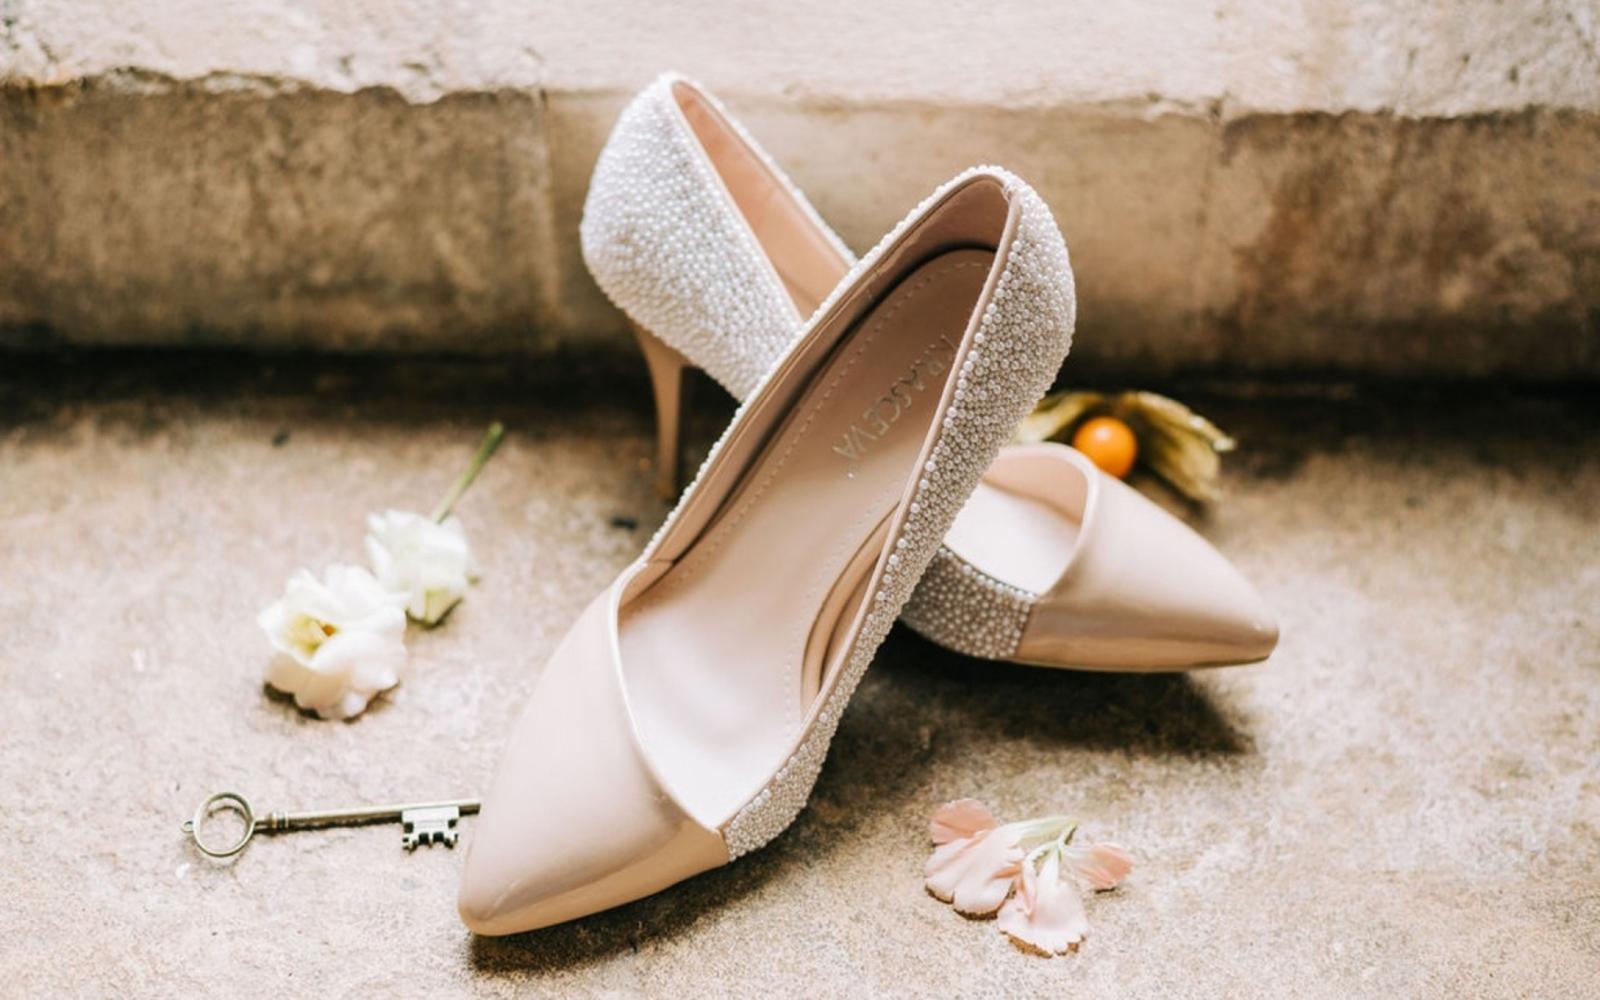 Corky and Prince Kimmi's Cakes Polly Morton Makeup Artist Dymond's Shoes and Accessories The Middle Green My eden Rachel Jane Photography styled shoot at The Royal Agricultural University wedding venue Cirencester eco-friendly artisan sustainable hand made bespoke bridal heels